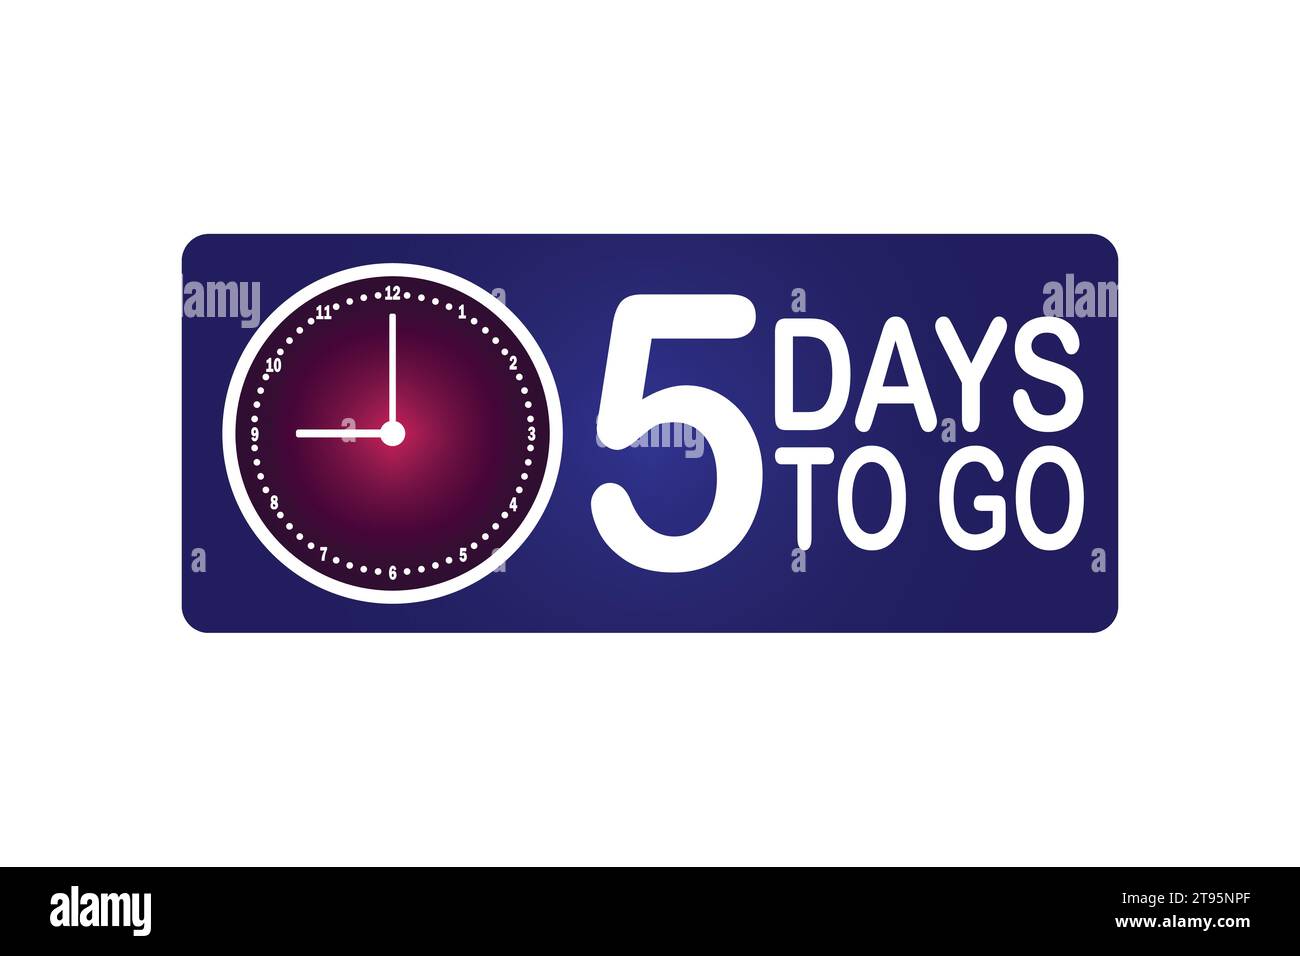 5 days to go clock icon on blue background. Countdown left days banner ...